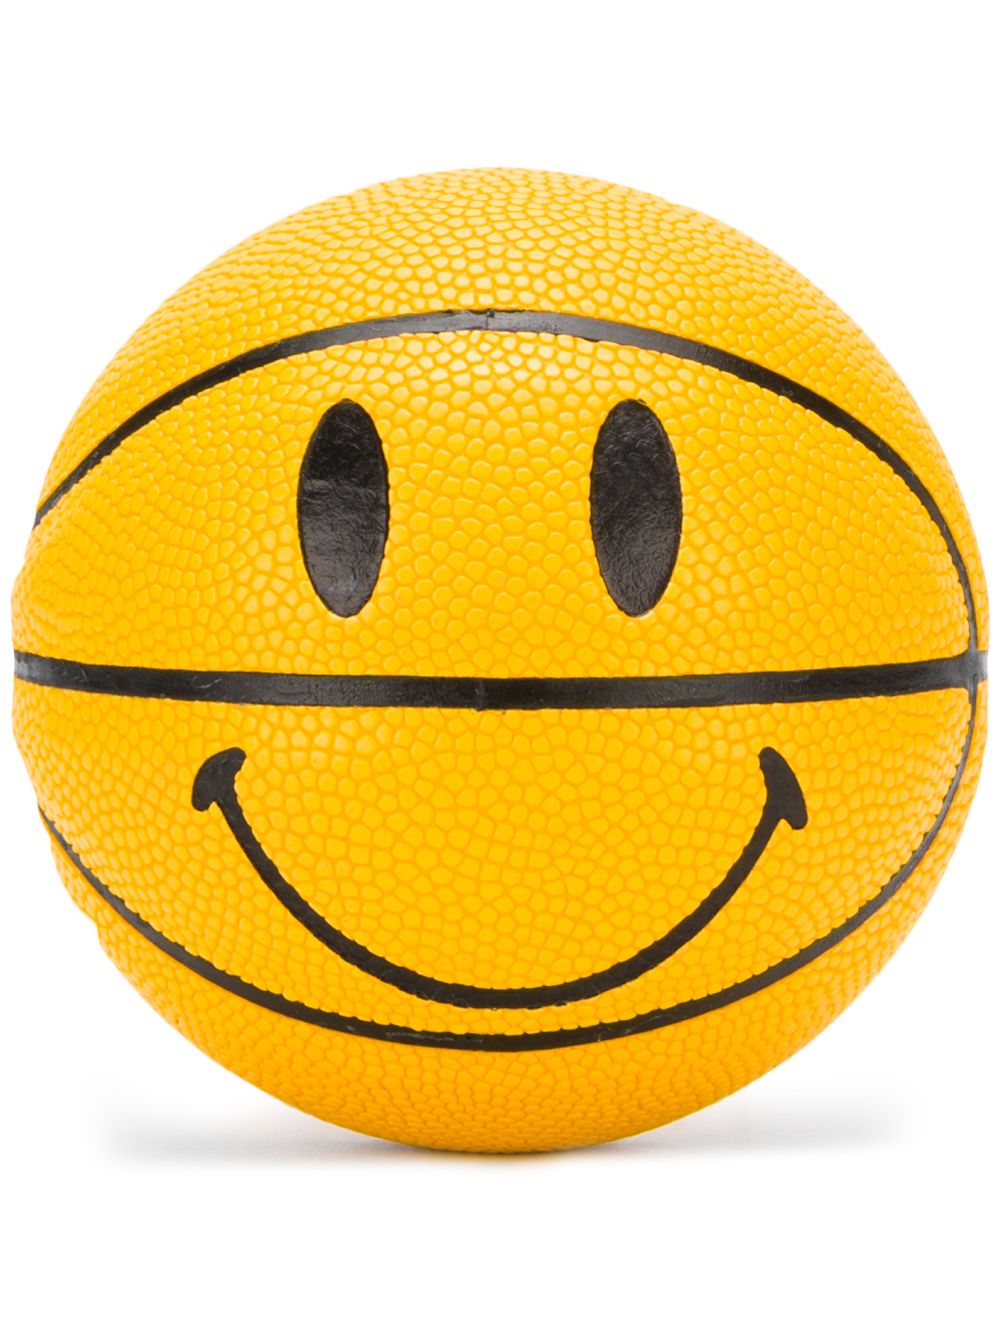 Chinatown Market Smiley Face Basket Ball In Yellow